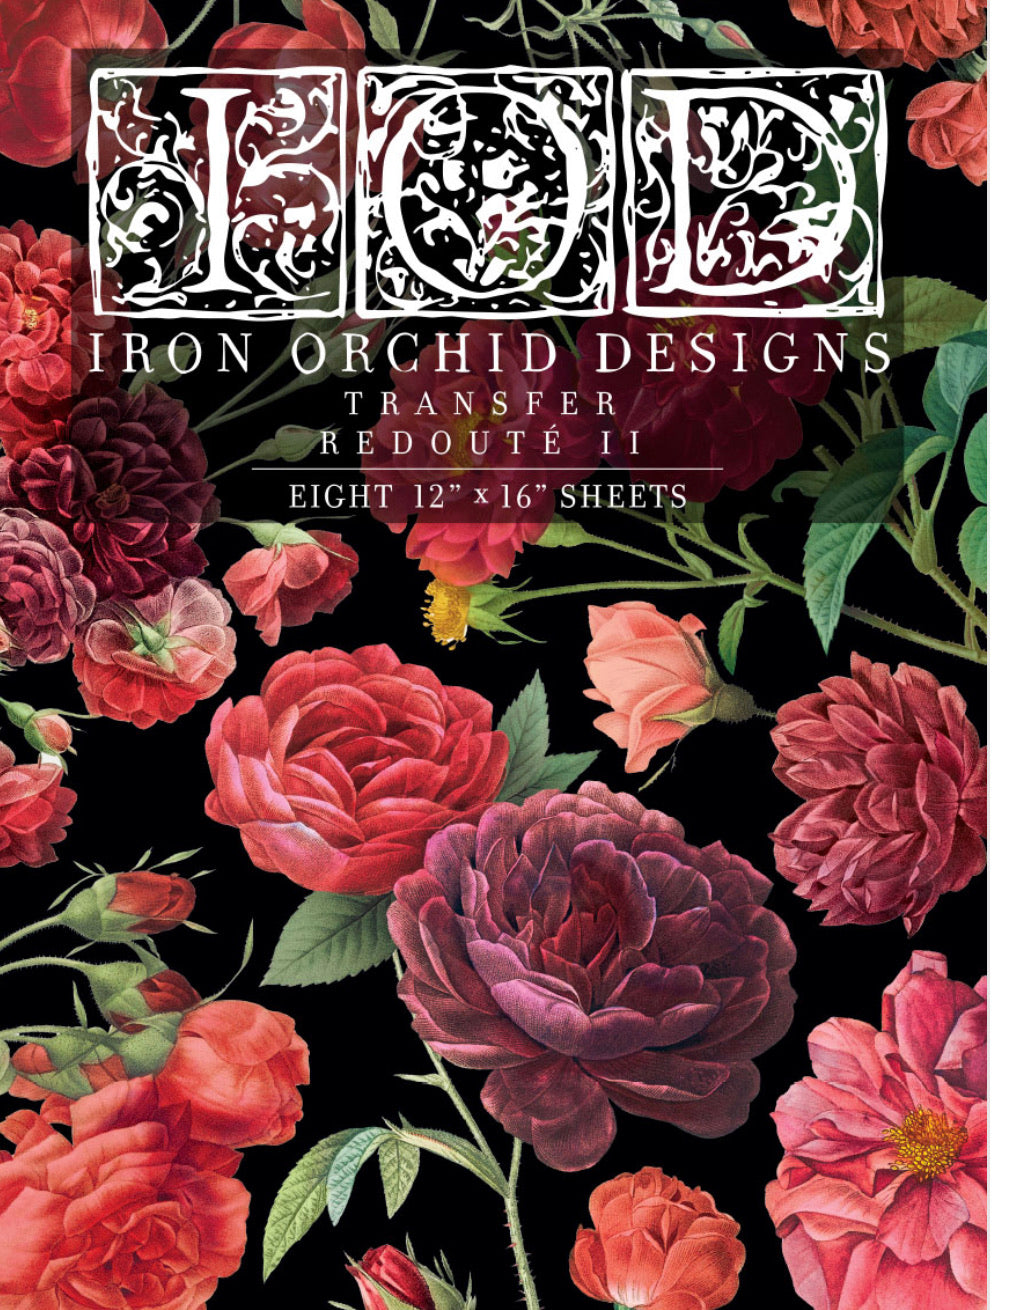 Redouté 2 IOD™ Transfers Iron Orchid Designs